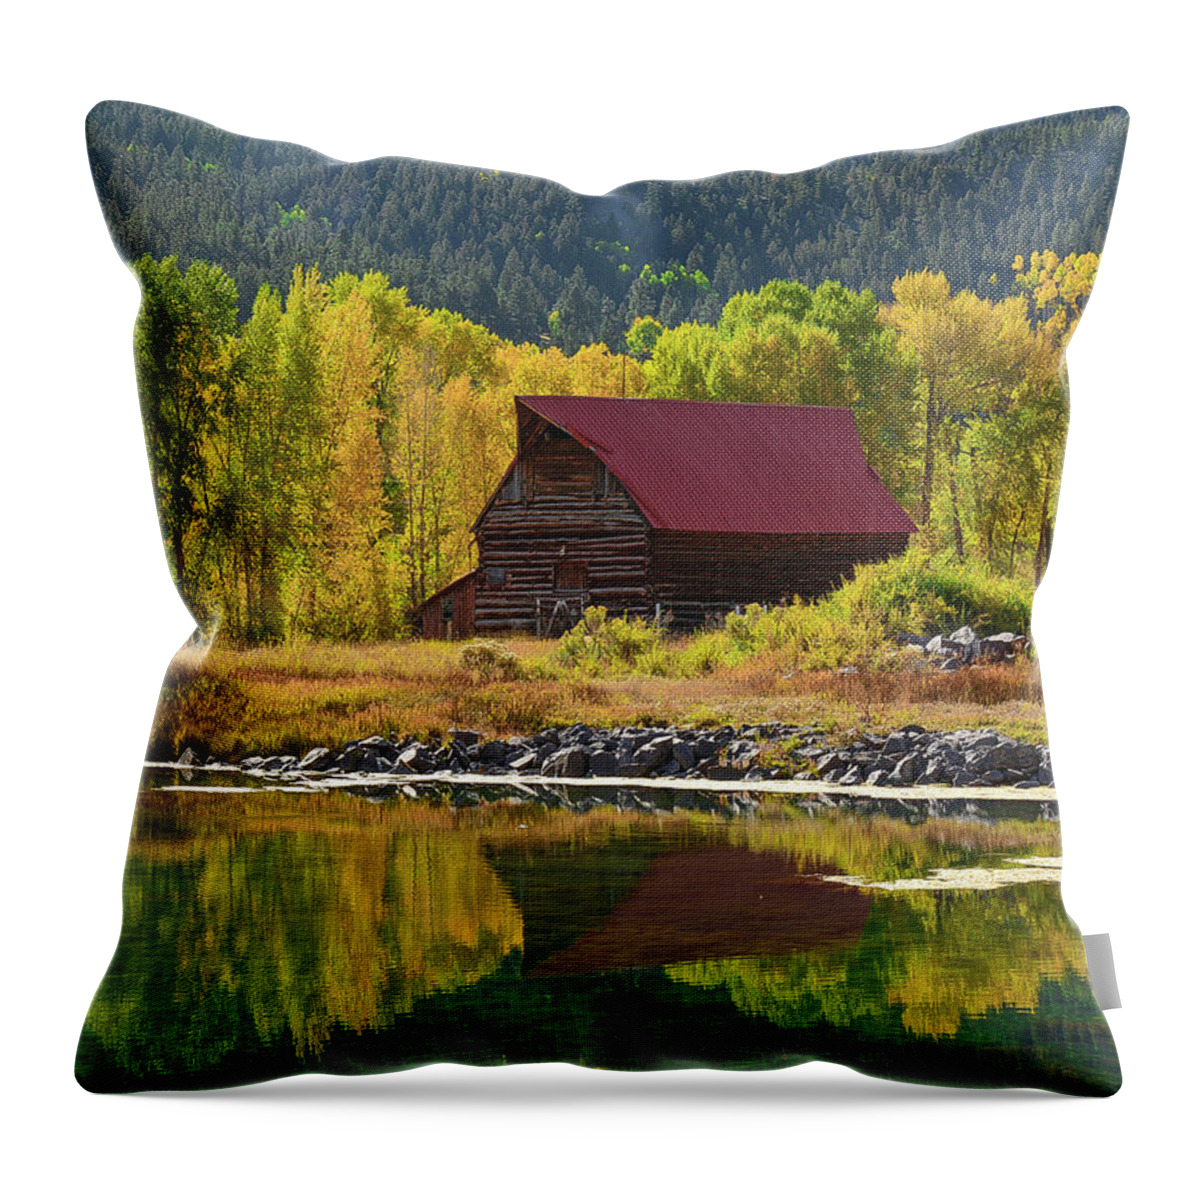 Barn Throw Pillow featuring the photograph Barn Refelction by Aaron Spong